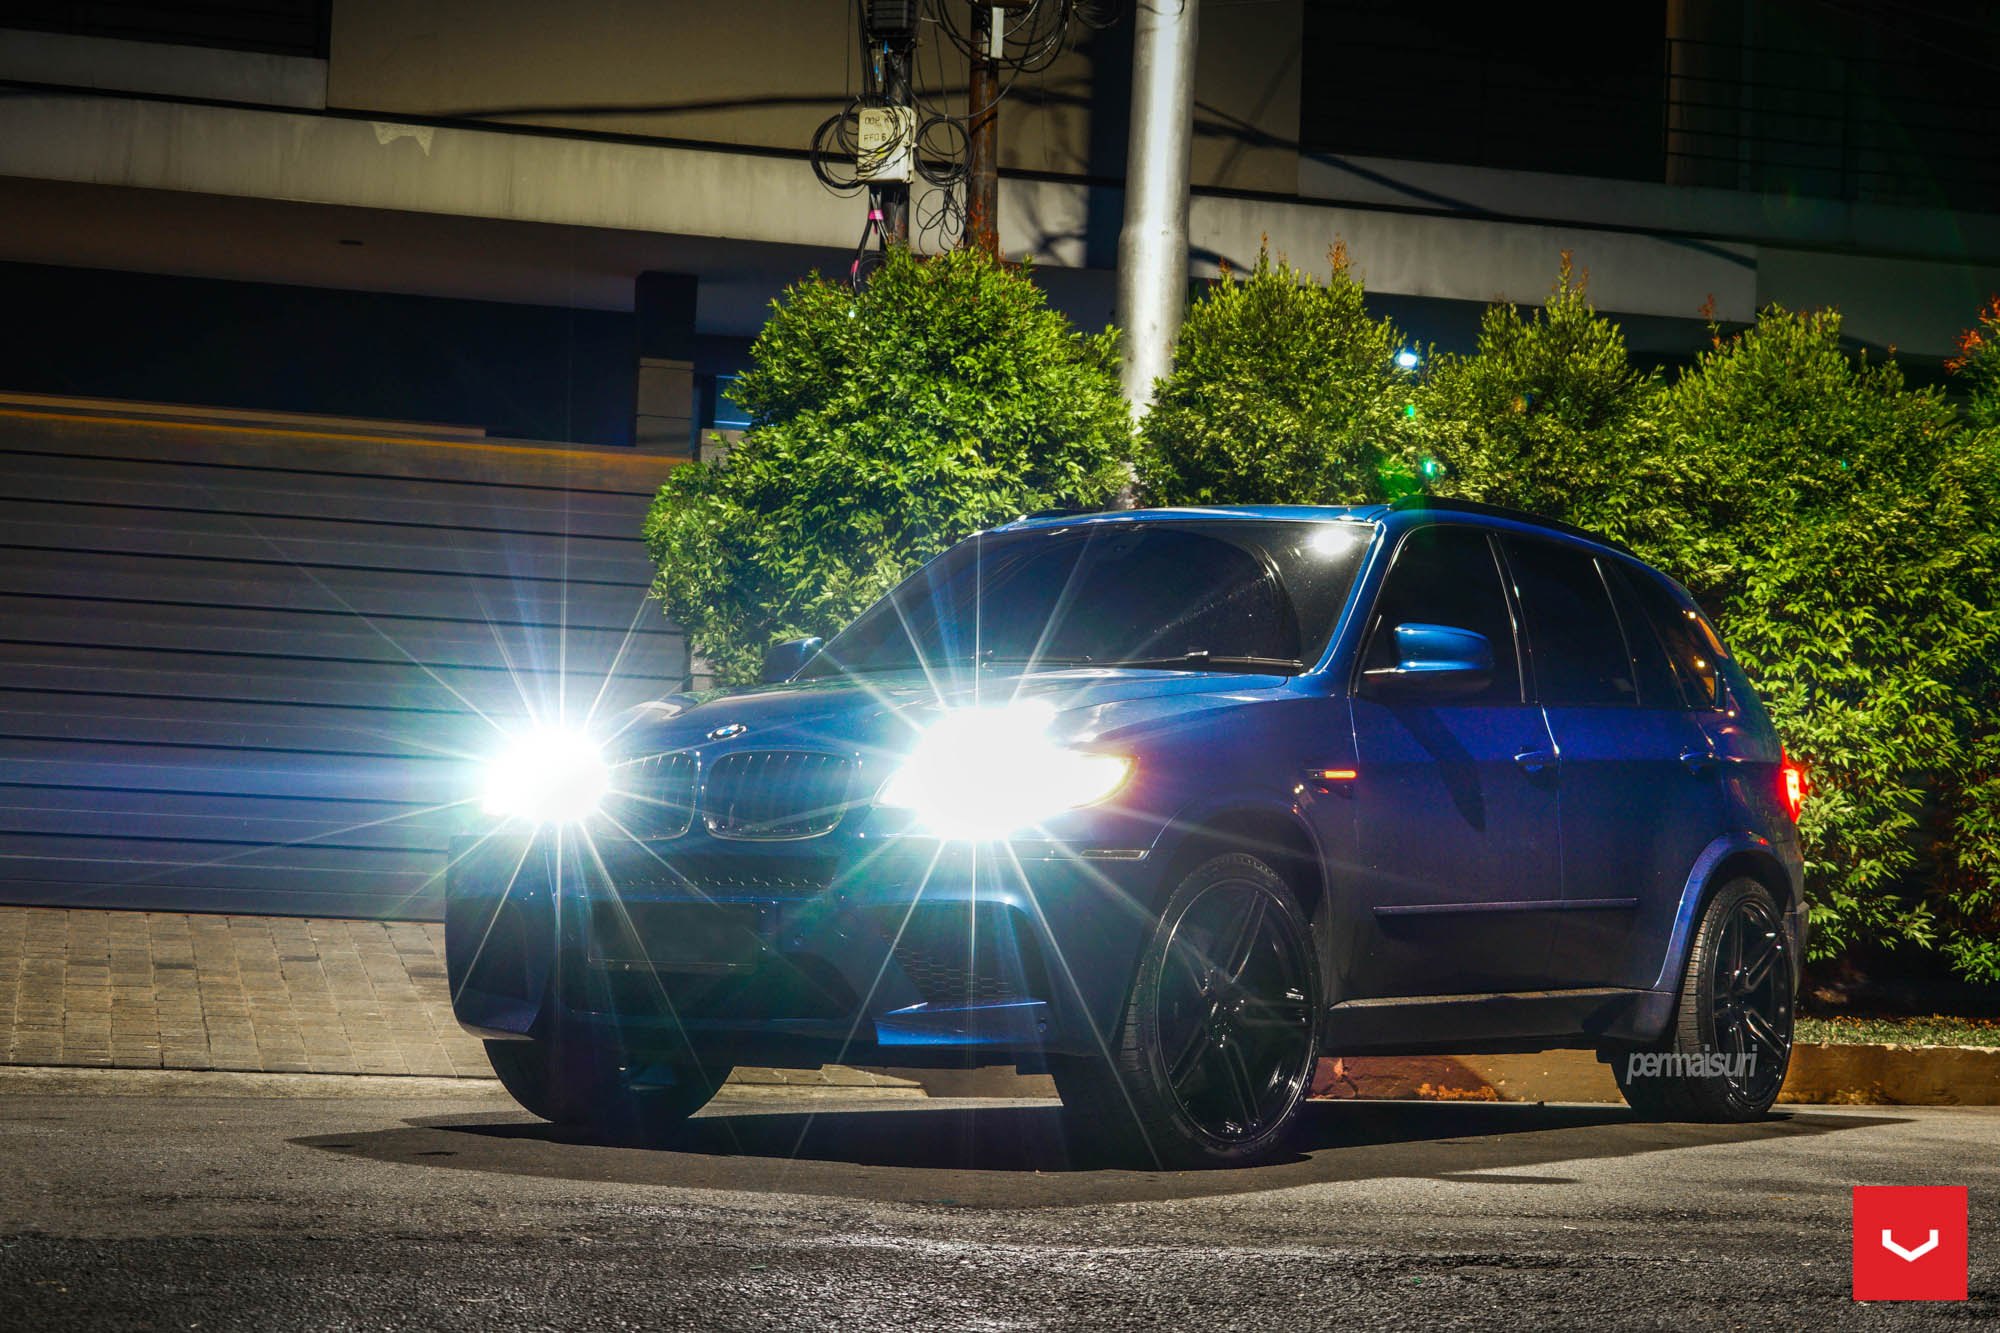 Aftermarket Projector Headlights on Blue BMW X5 - Photo by Vossen